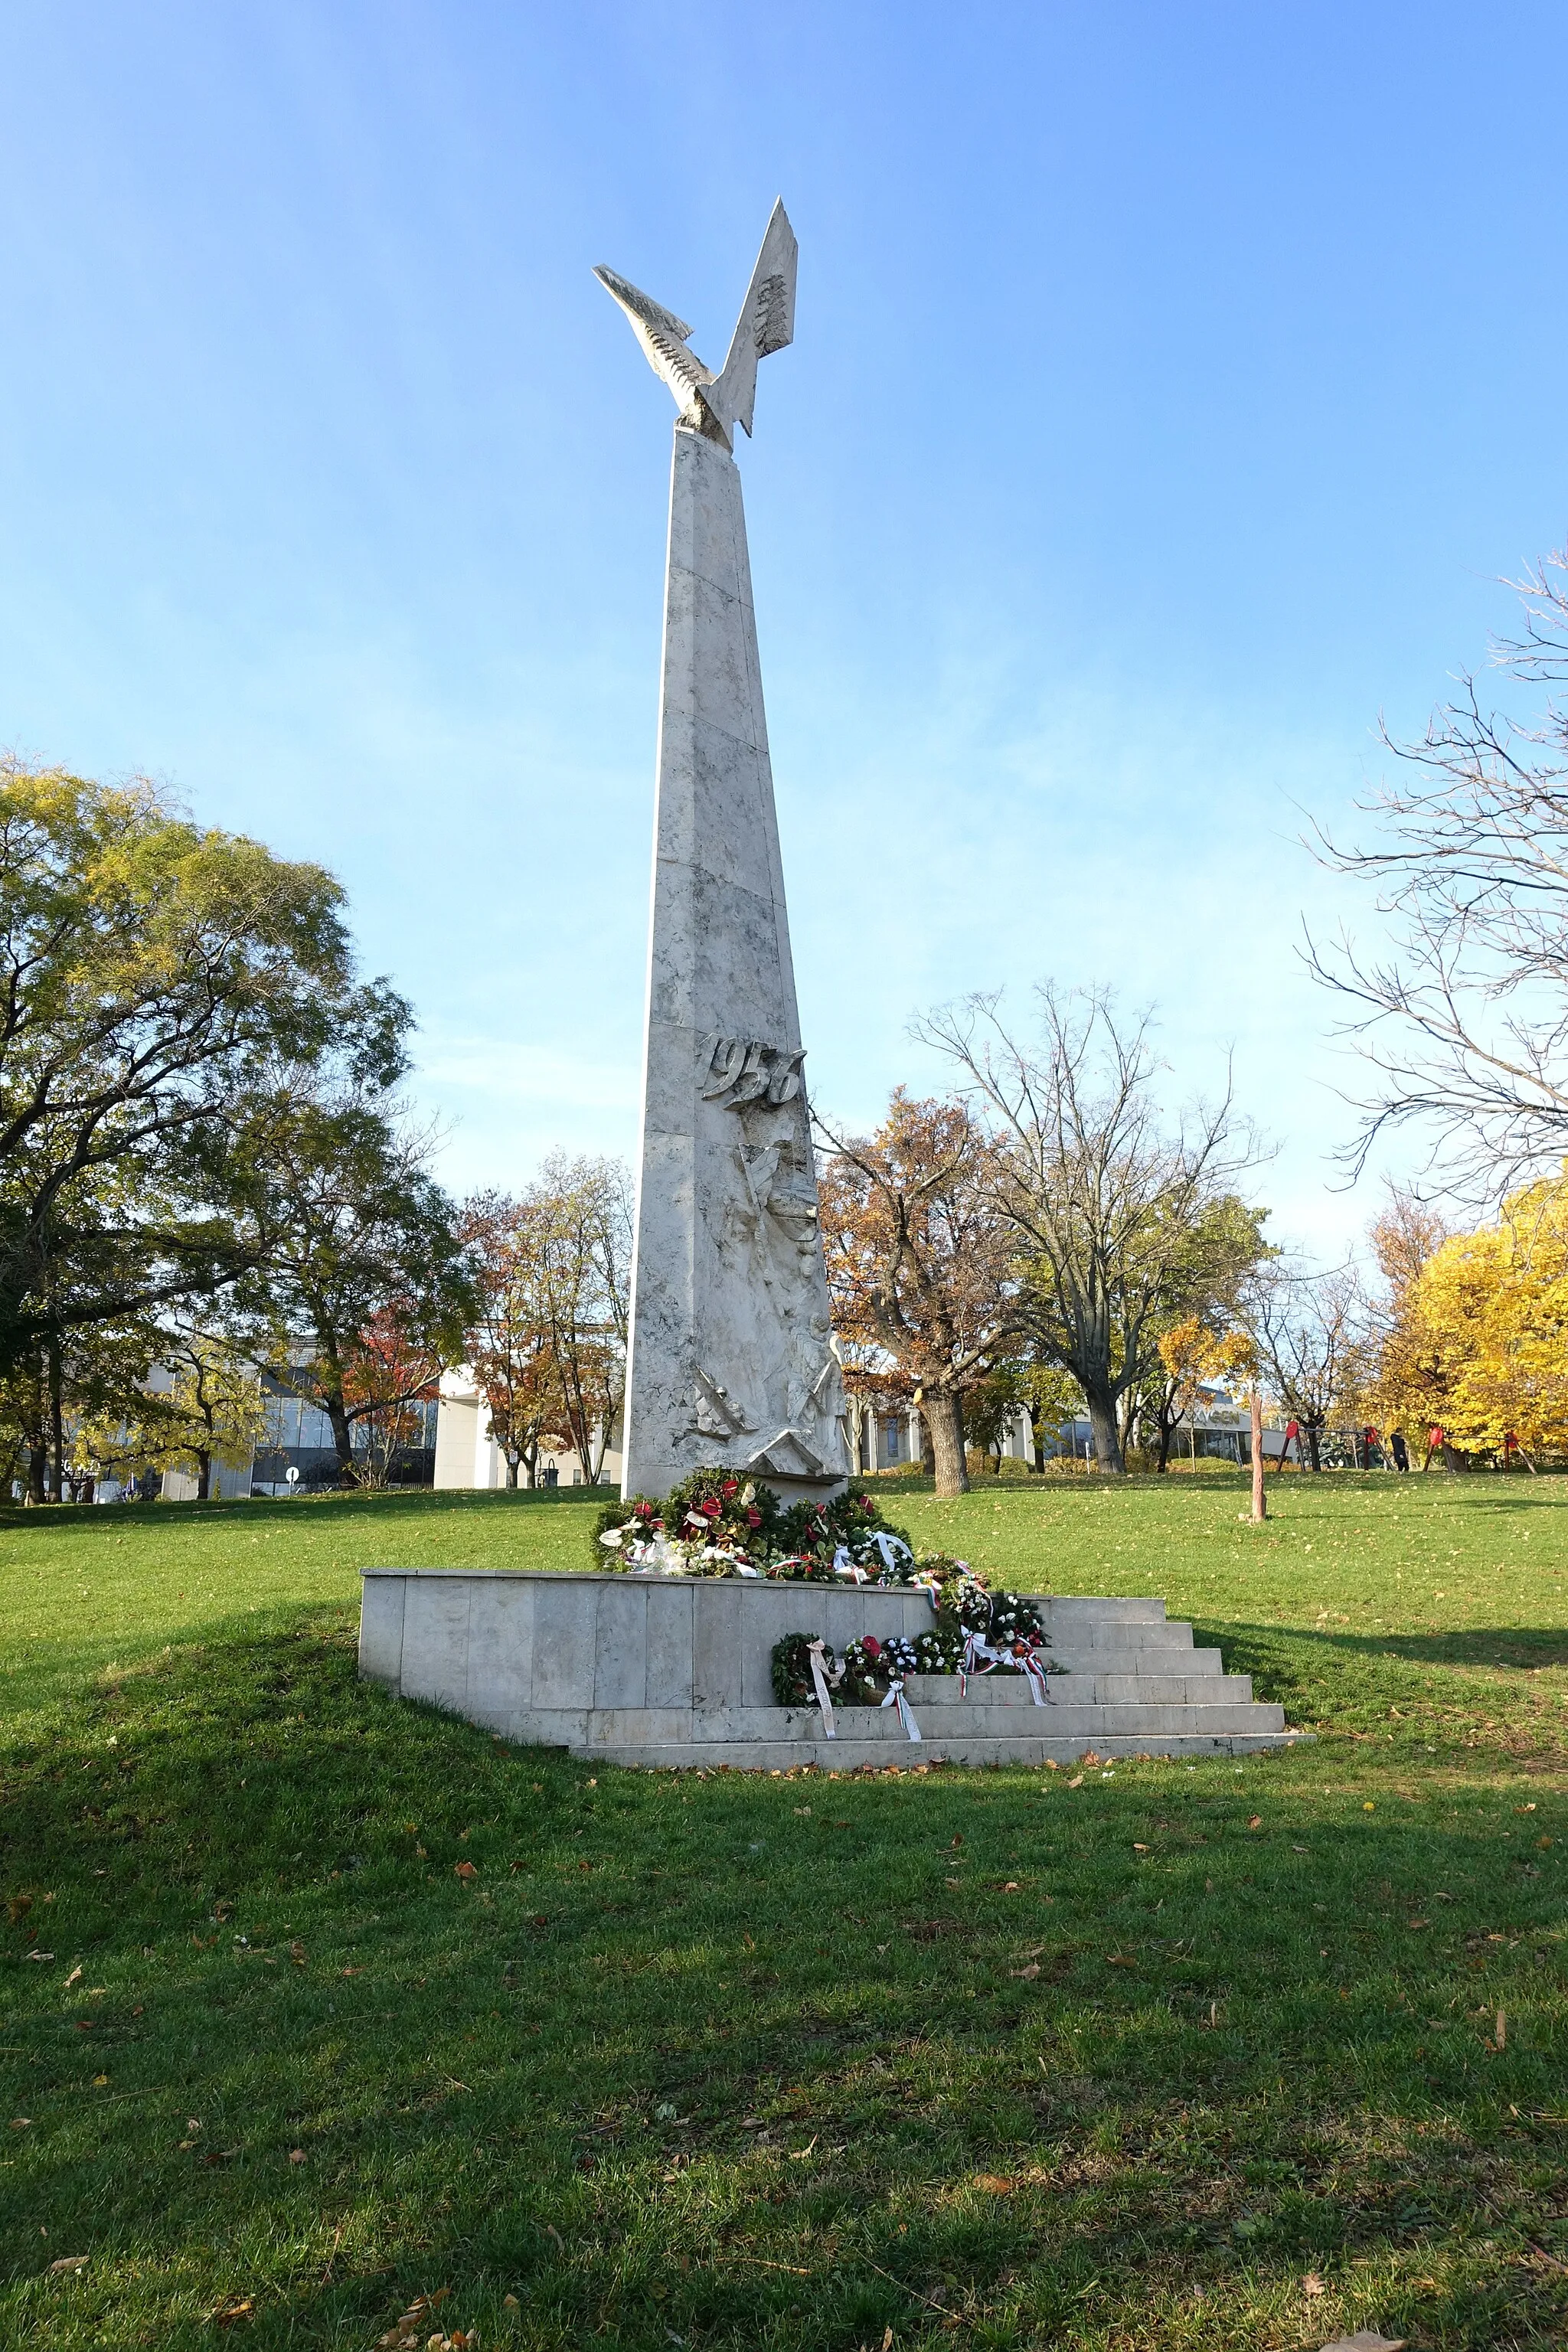 Photo showing: Memorial of the 1956 Revolution in Tabán Park, erected in 1996. Stone obelisk with a relief of freedom fighters and a stylized bird on top. Location: Tabán Park, Budapest District I., Hungary. Two plaques on the back-side: (1) Erected by a generous donation of the 1956 Hungarian freedom fighters living abroad, the 1956 Monuments and Piety Foundation, and Tibor Hornyák, József Vajda Németh and György Lassan freedom fighters. 1996; (2) This monument was erected for the 40th anniversary of our revolution by the Hungarian people and the surviving freedom fighters to the memory of the martyrs and participants in remembrance of the exemplary patriotism of the heroes / Those who sacrificed his life for the motherland has not died because the future generations of posterity will remember the glorious memory of the heroes of 1956 / Board of Trustees of the 1956 Monuments and Piety Foundation